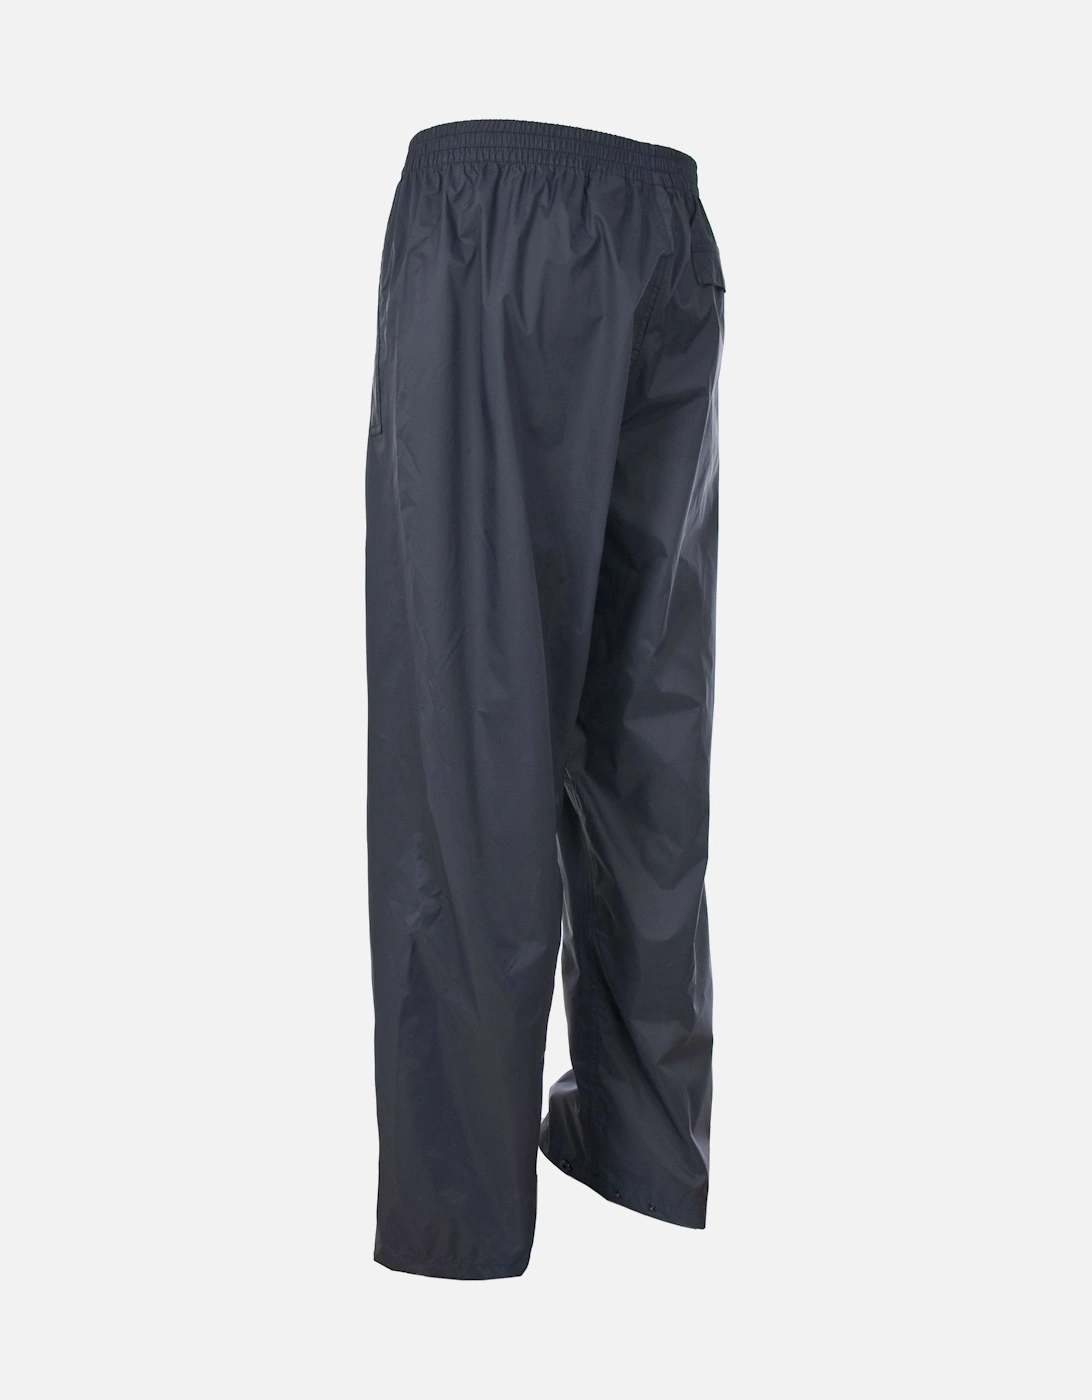 Adults Unisex Qikpac Overtrousers/Bottoms